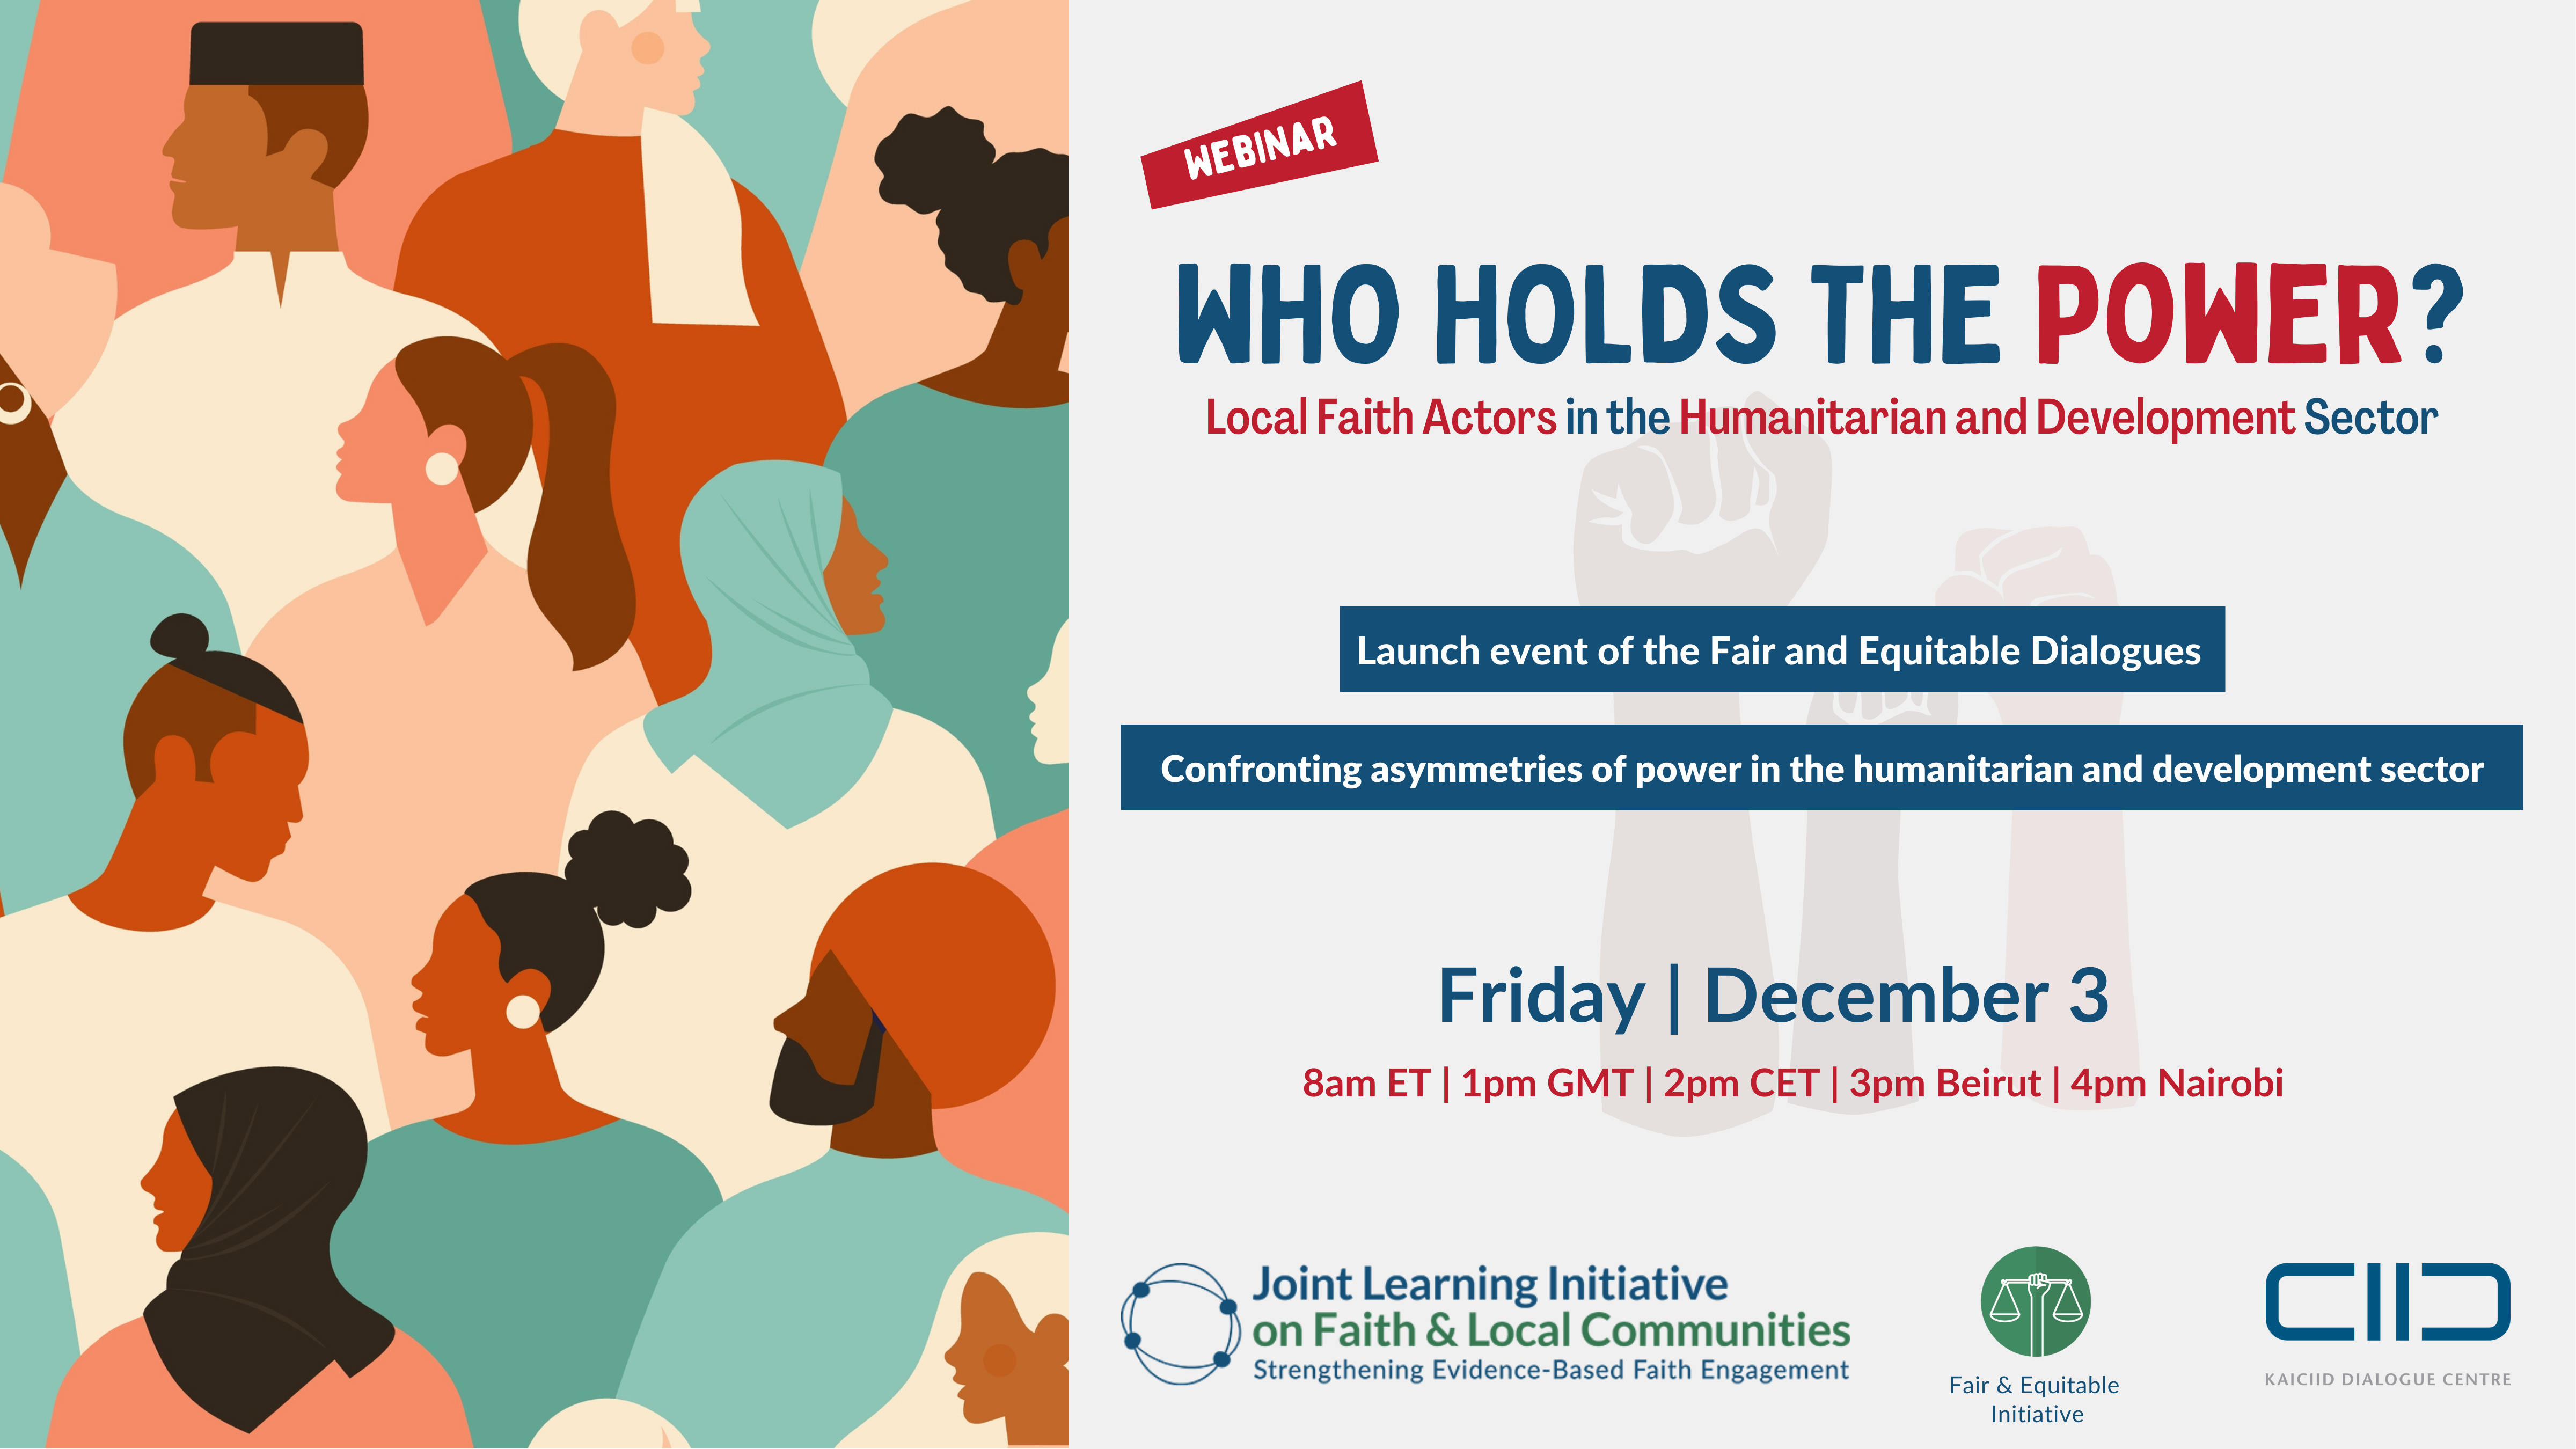 Who holds the power? Local Faith Actors in the Humanitarian and Development Sector